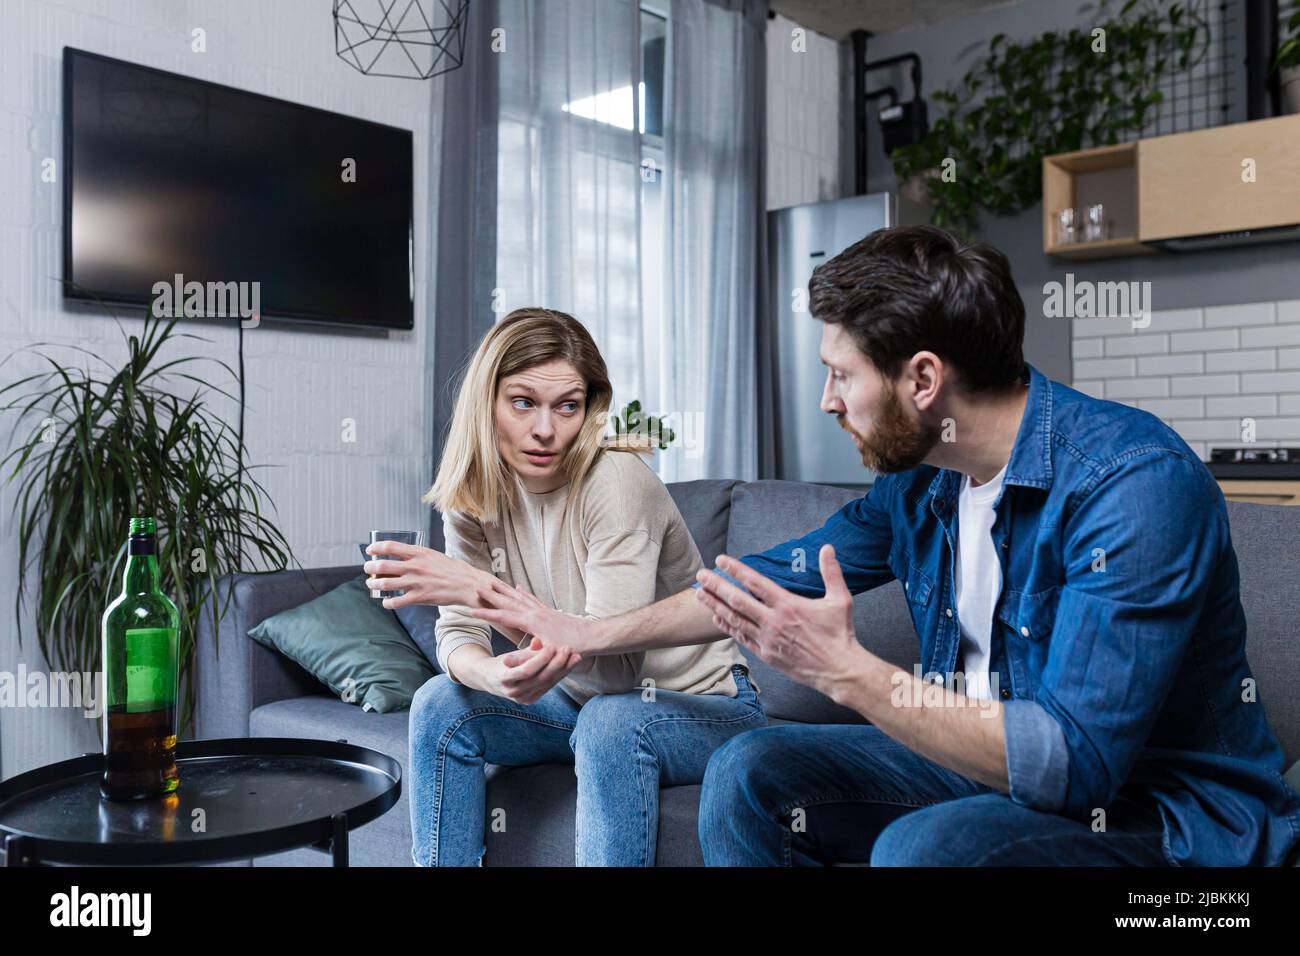 Female alcoholism, family quarrel at home, wife drinking alcohol, husband trying to stop her, sitting on the couch Stock Photo